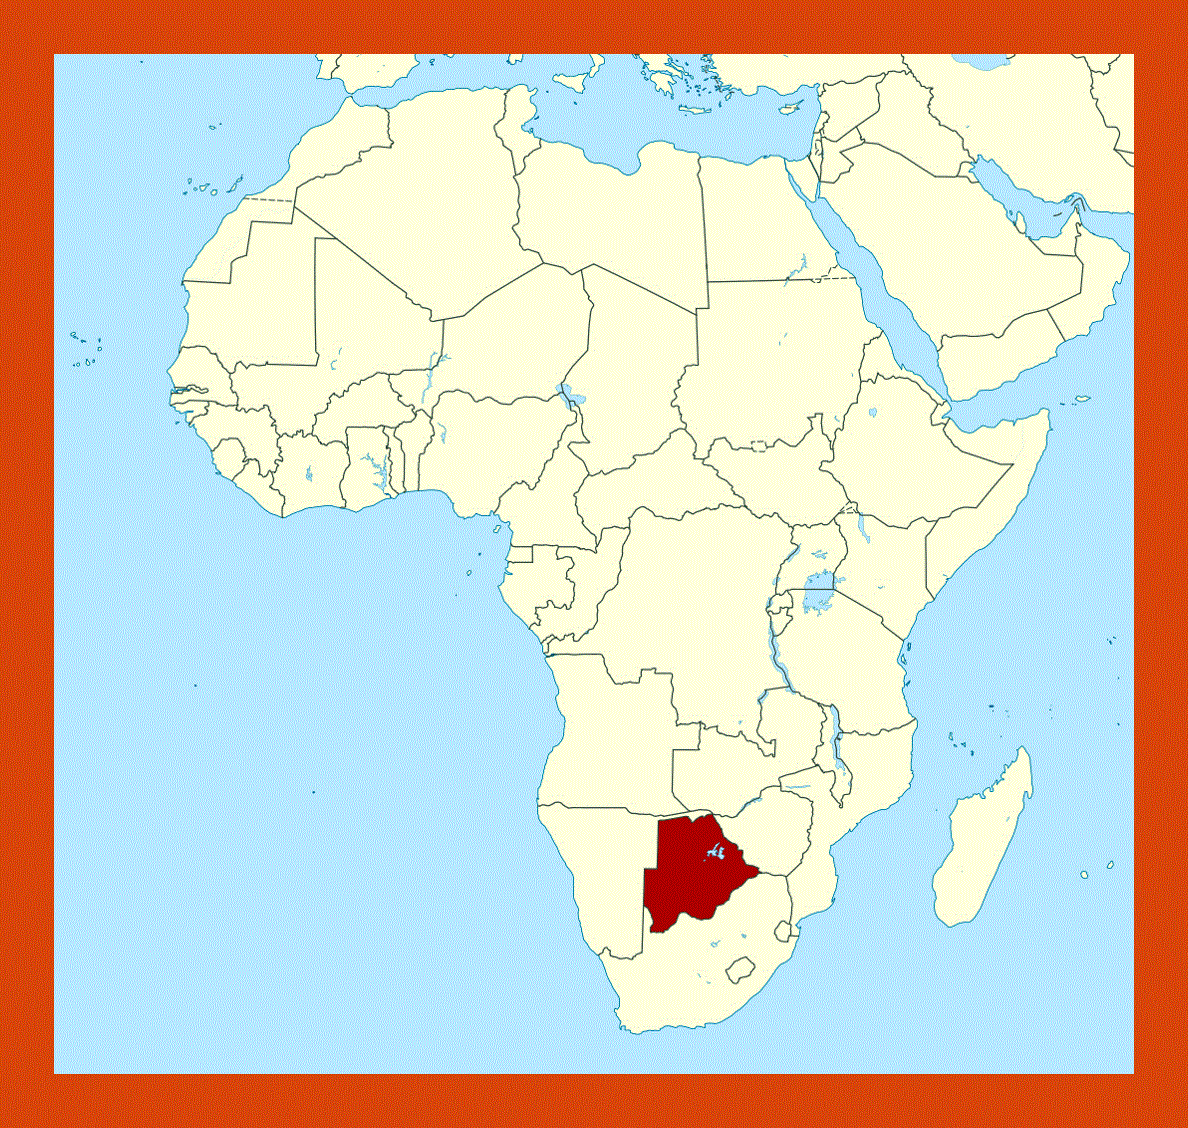 Location map of Botswana in Africa